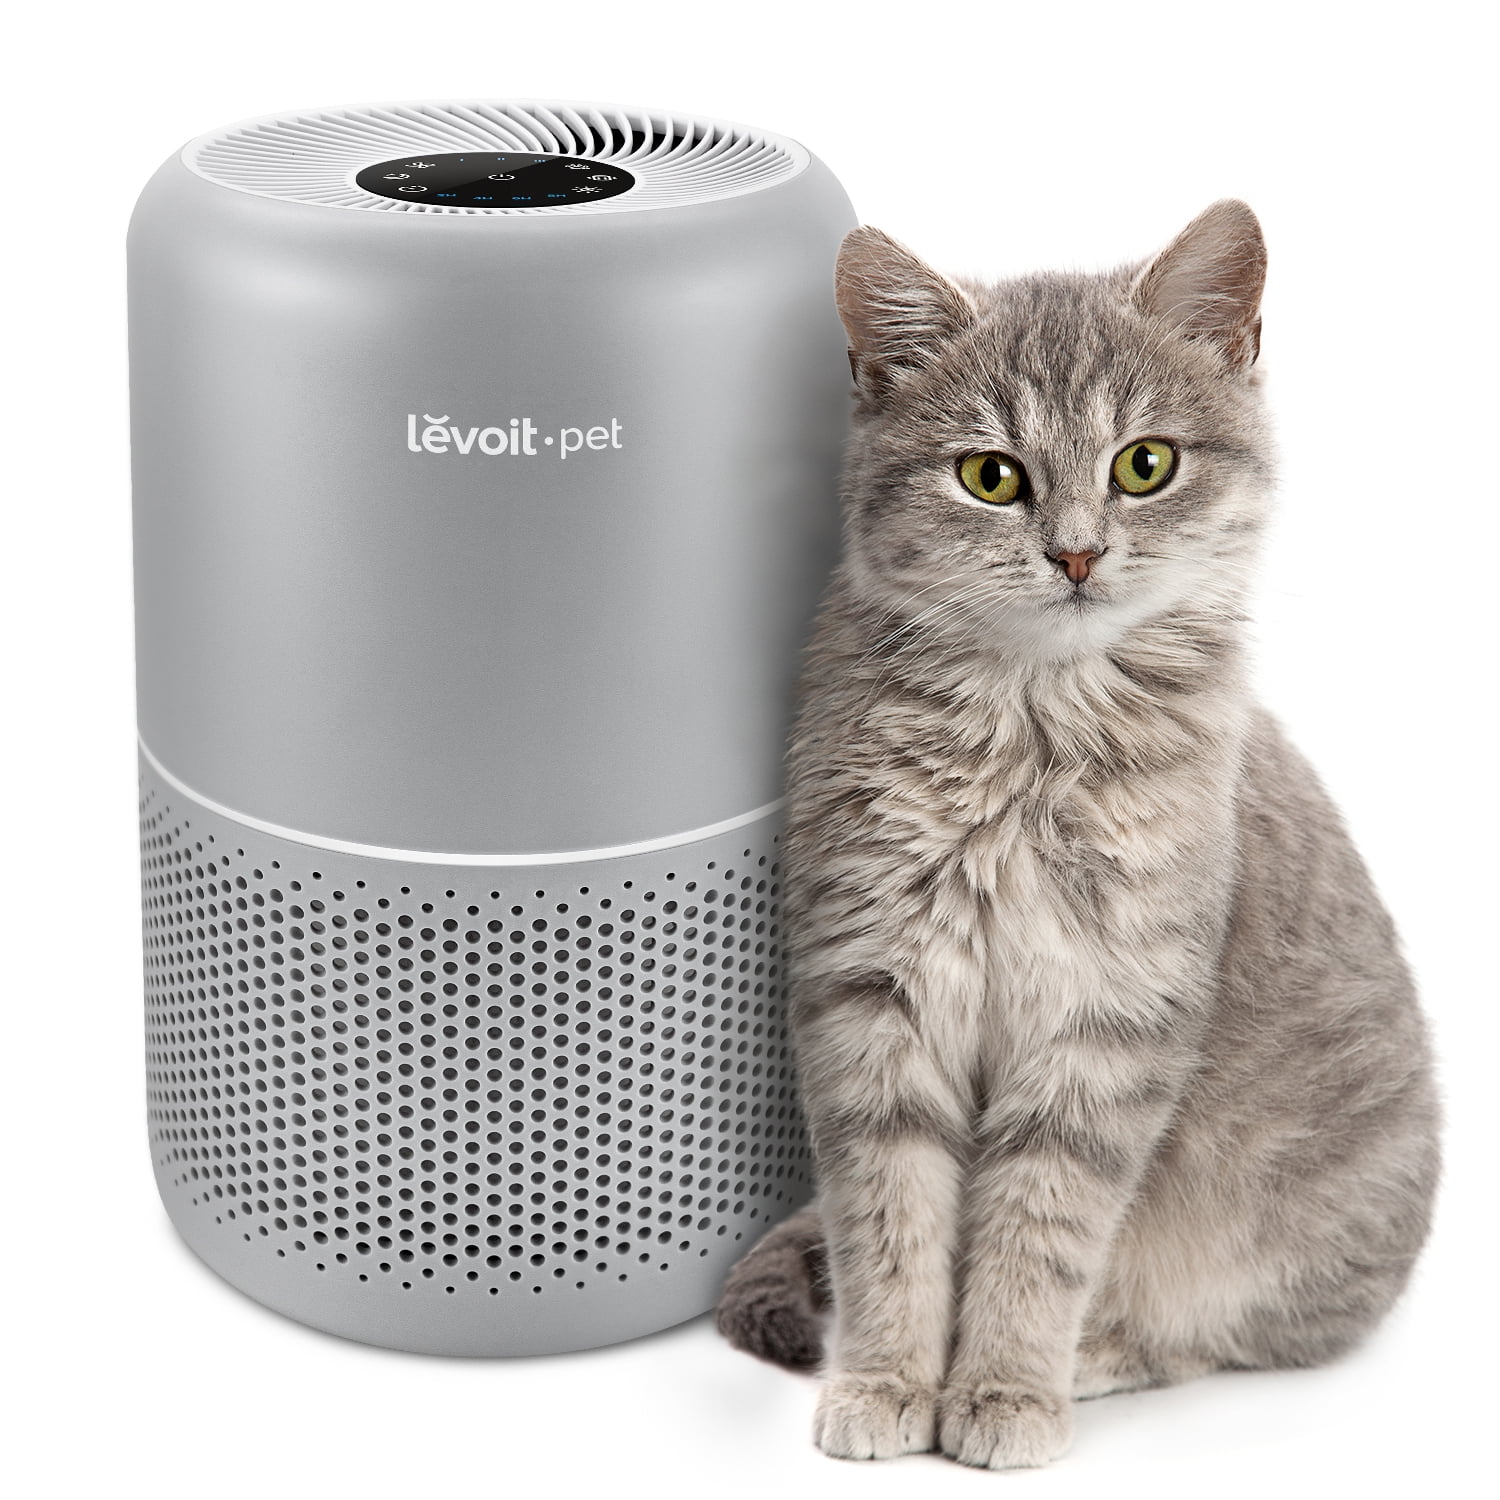 Levoit Air Purifier Core P350, True HEPA Filters for Pet Hairs, Odors,  Dander, Fur, Reduce Allergy Symptoms, for Large Rooms up to 529 sq. ft. Gray